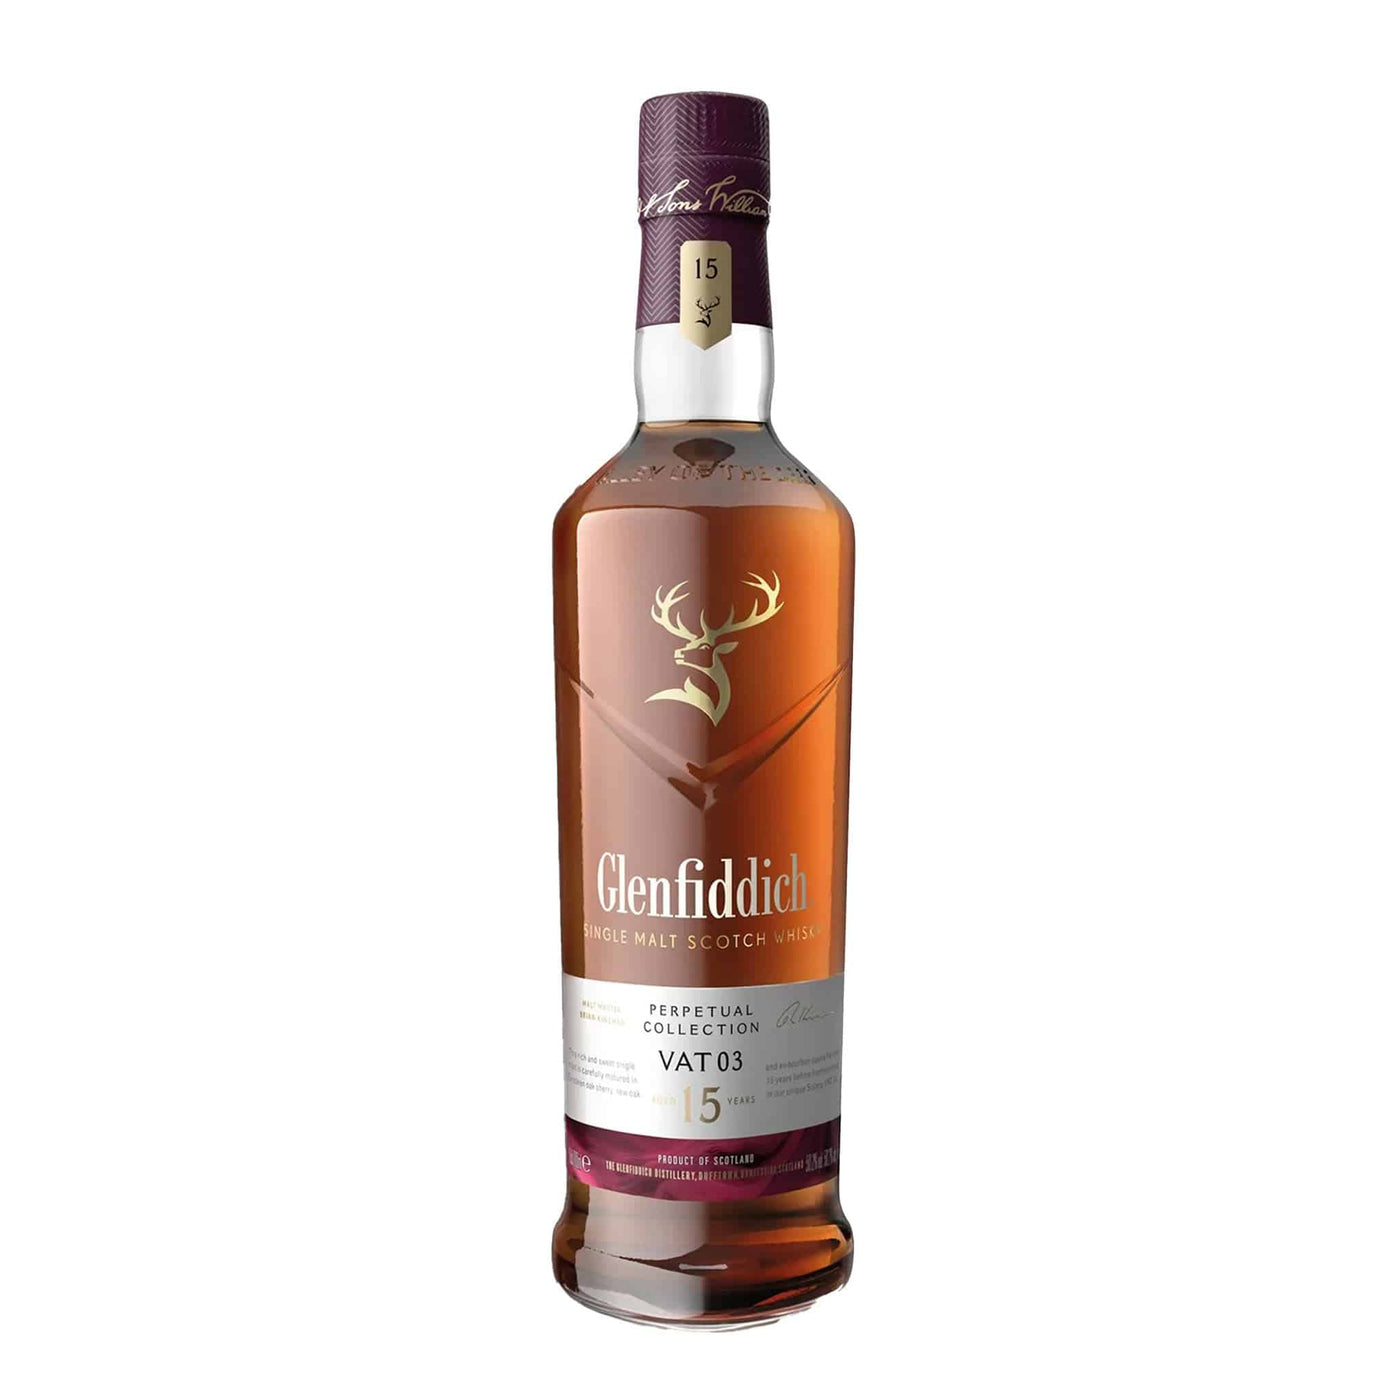 Glenfiddich Perpetual Collection 15 Years Vat 3 Whisky